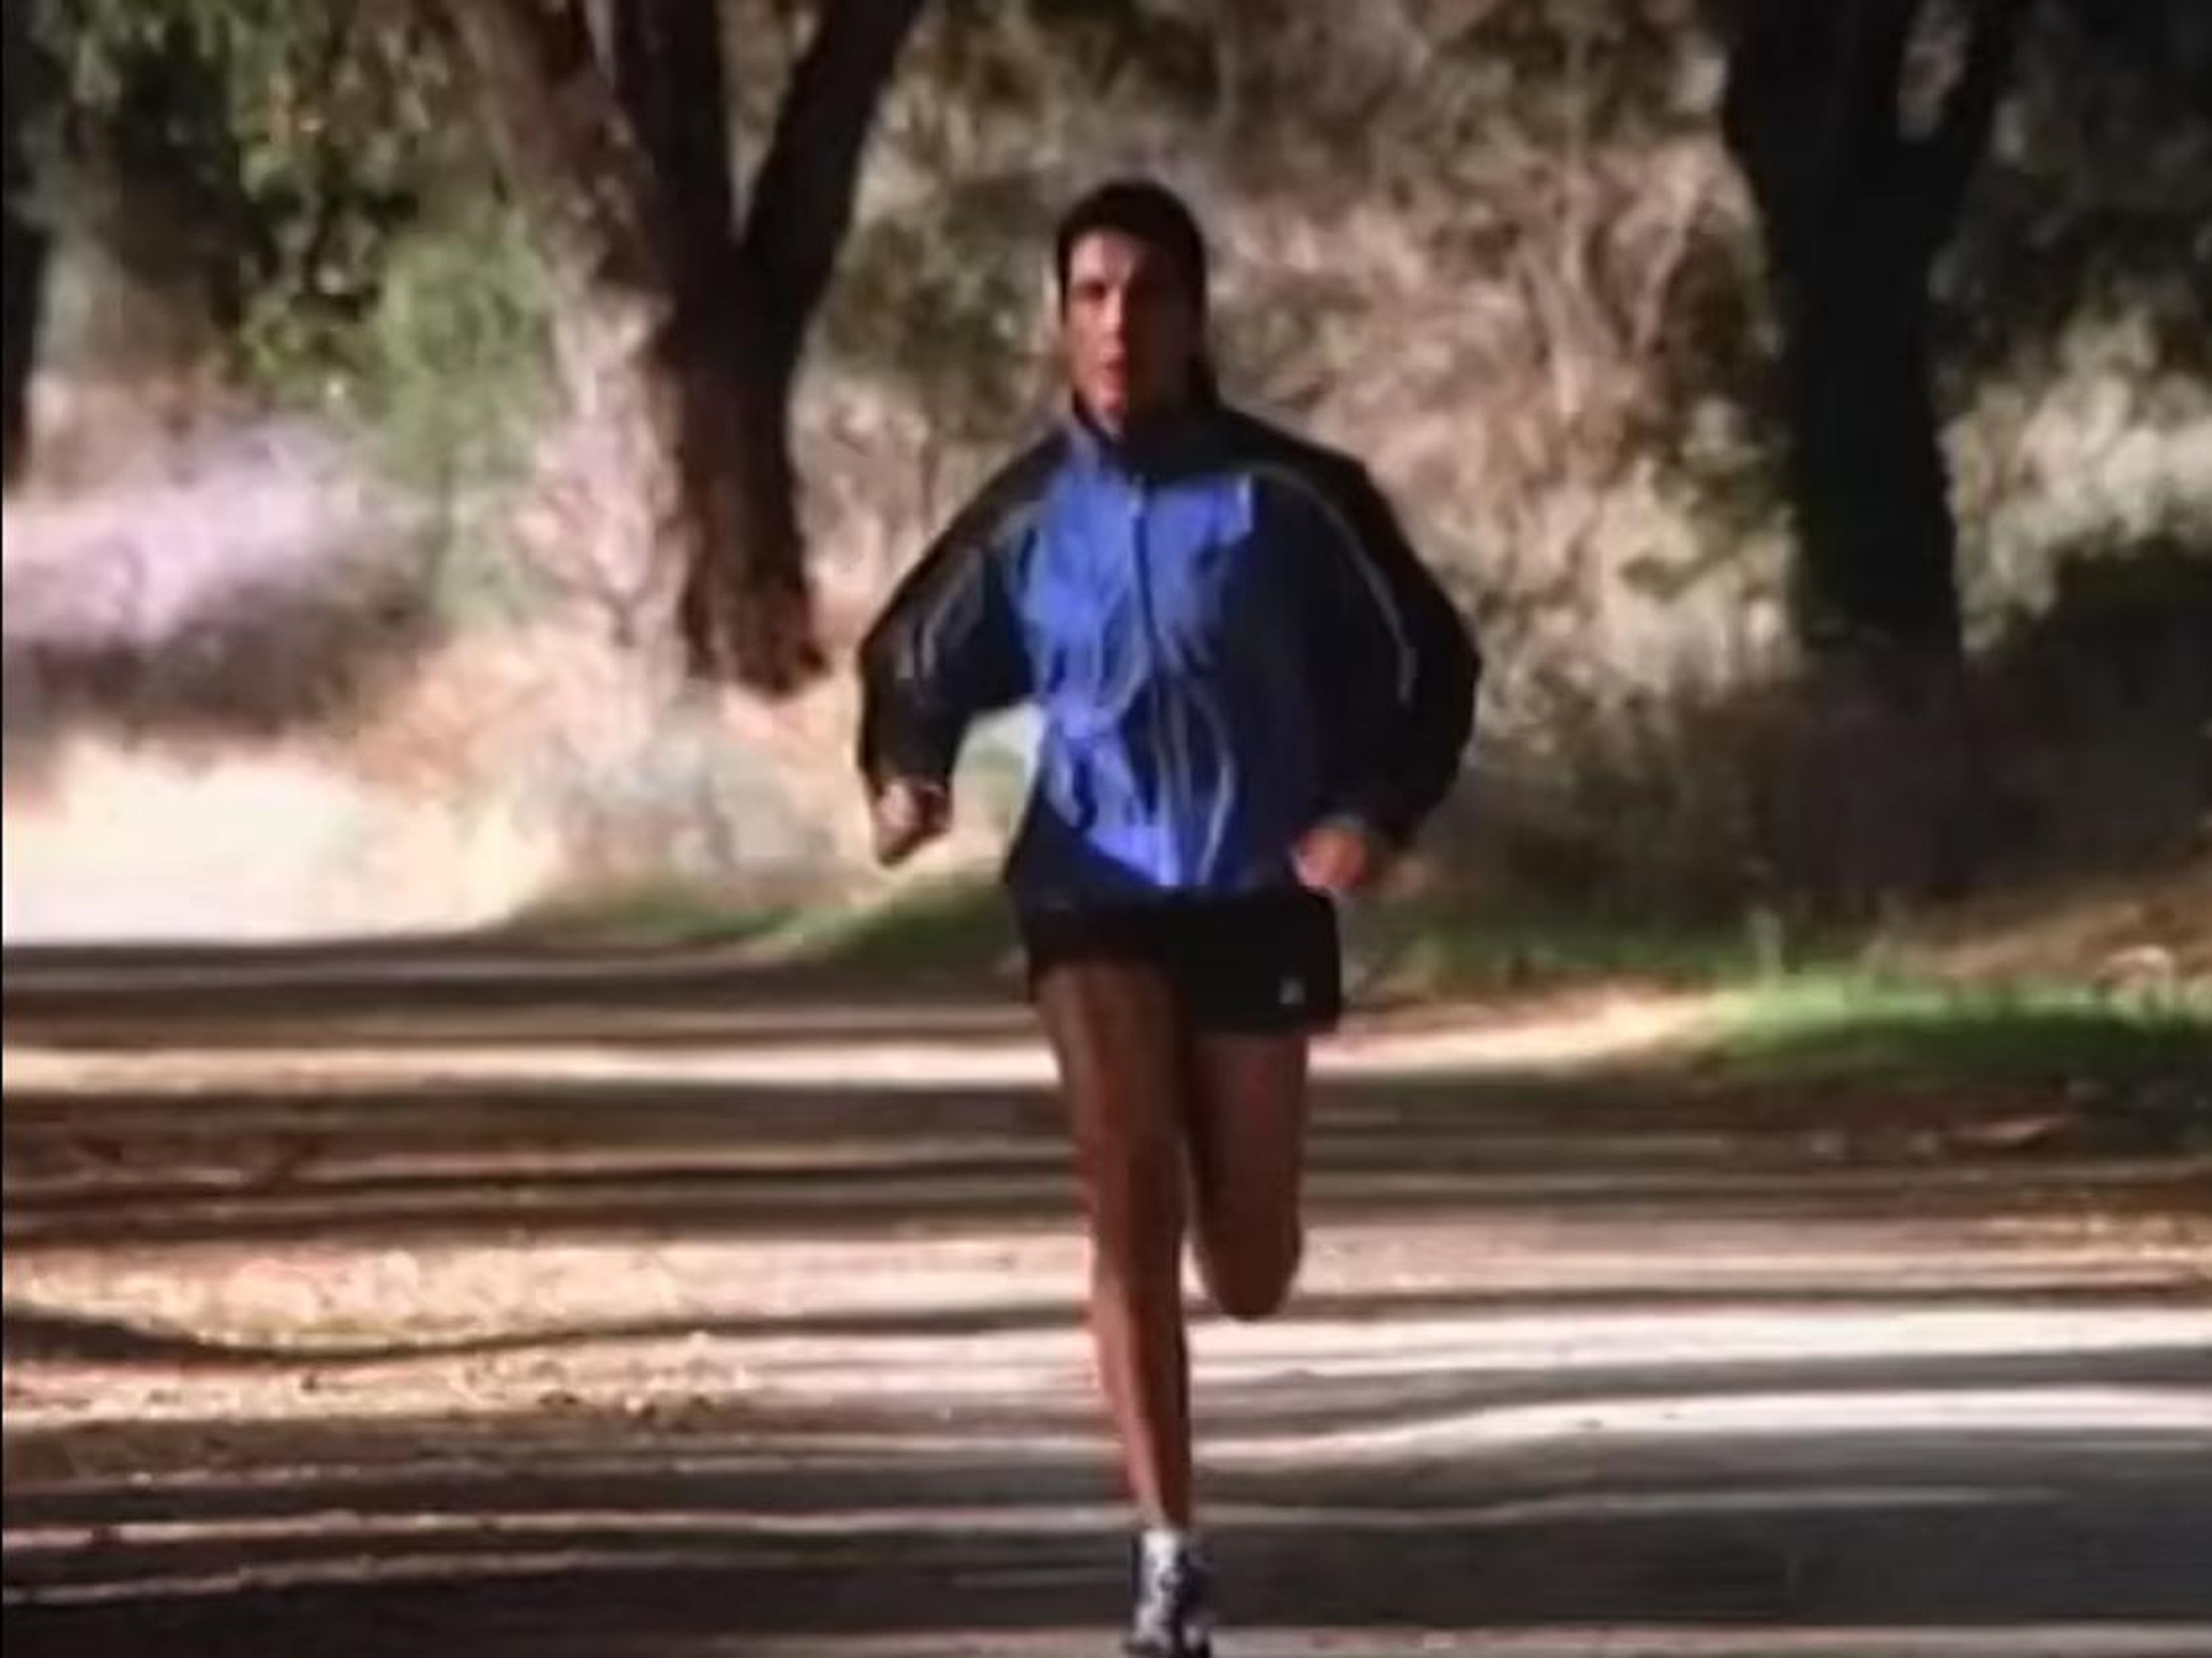 Nike made a statement when a 1995 "Just Do It" ad featured openly gay, HIV-positive runner Ric Munoz. AIDS activists applauded Nike for the campaign.